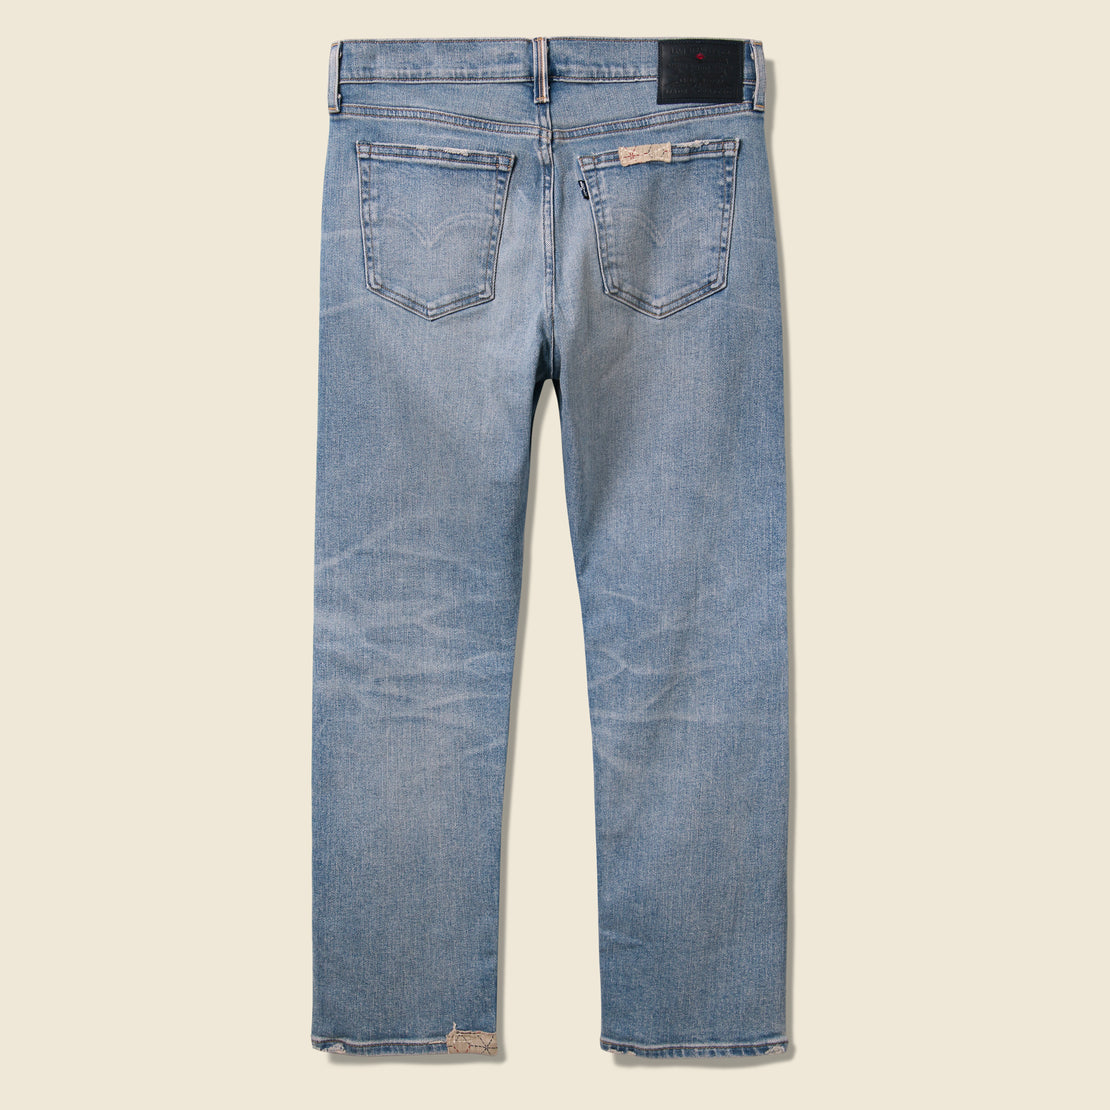 New Boyfriend Jean - Patched - Levis Made & Crafted - STAG Provisions - W - Pants - Denim